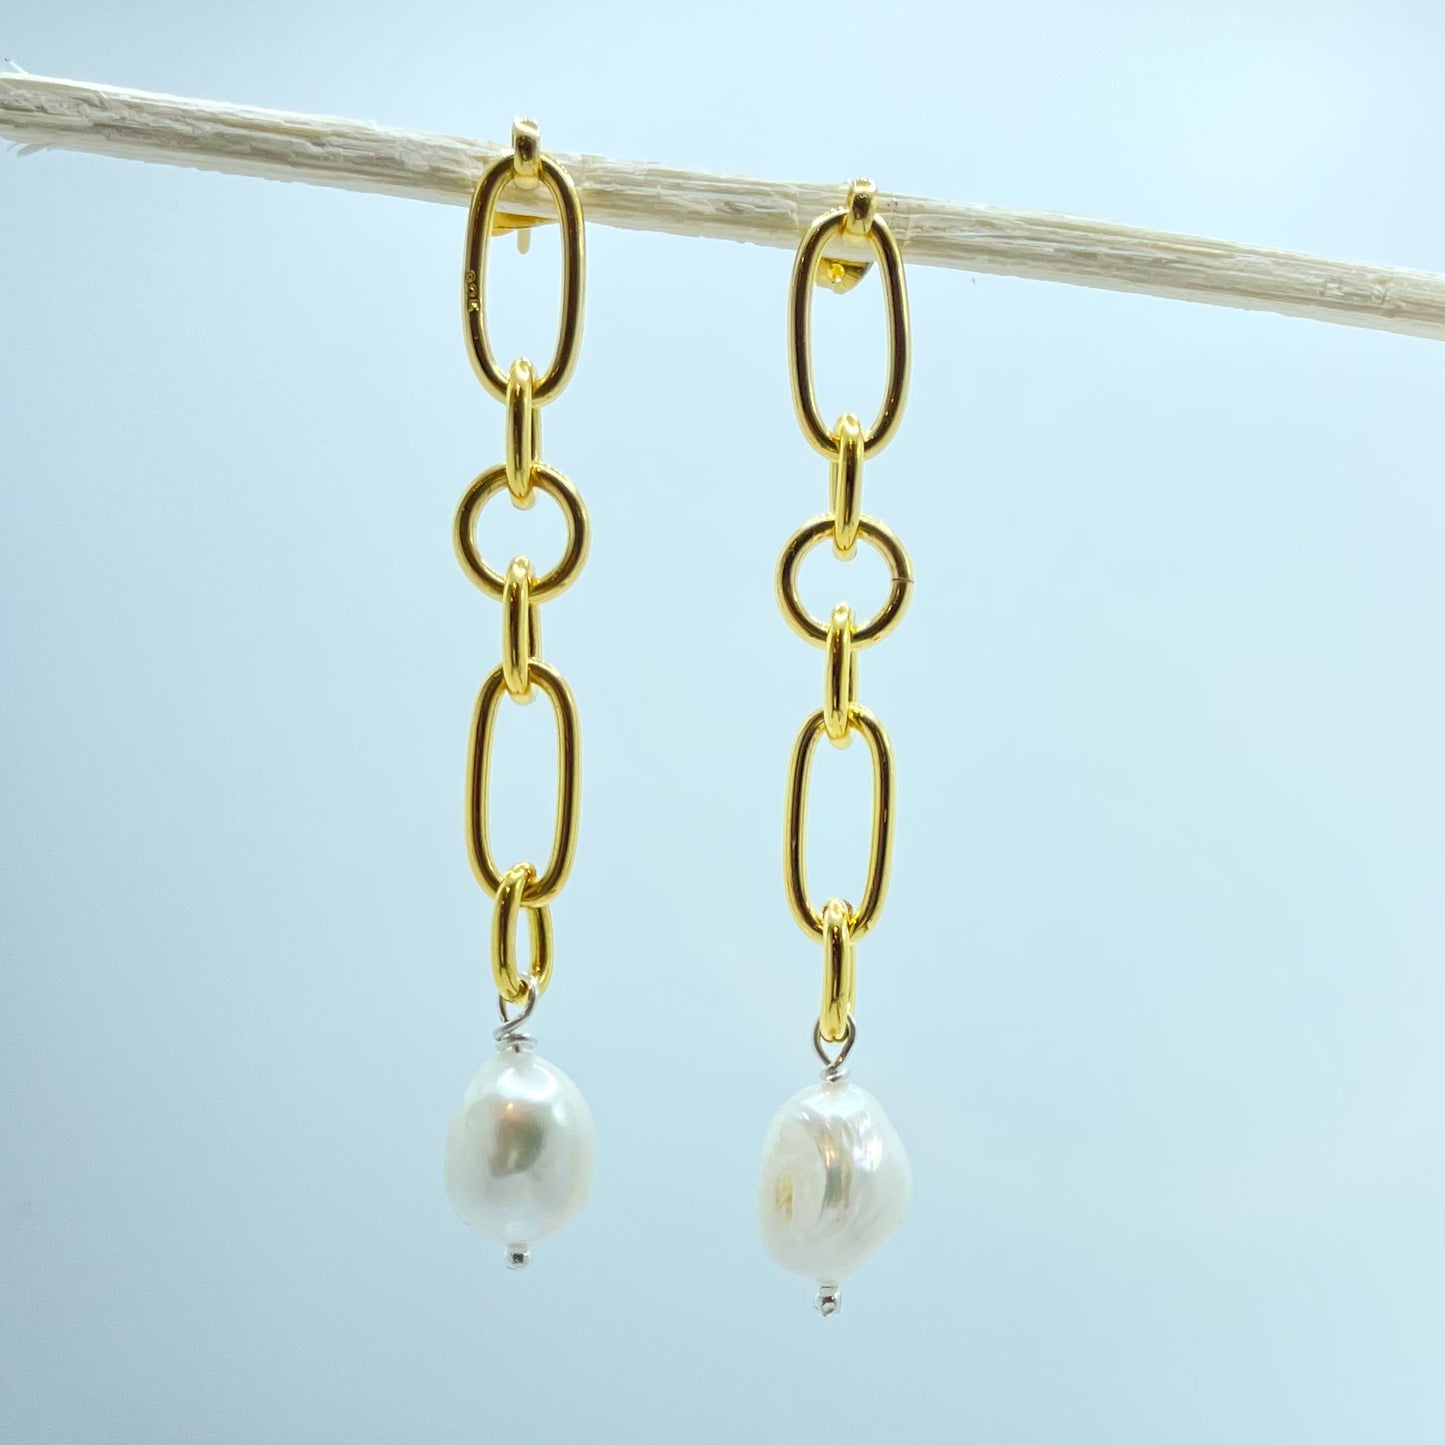 Pearla - Gold-filled Multi Link Silver Earrings With White Fresh Water Pearl - Stud